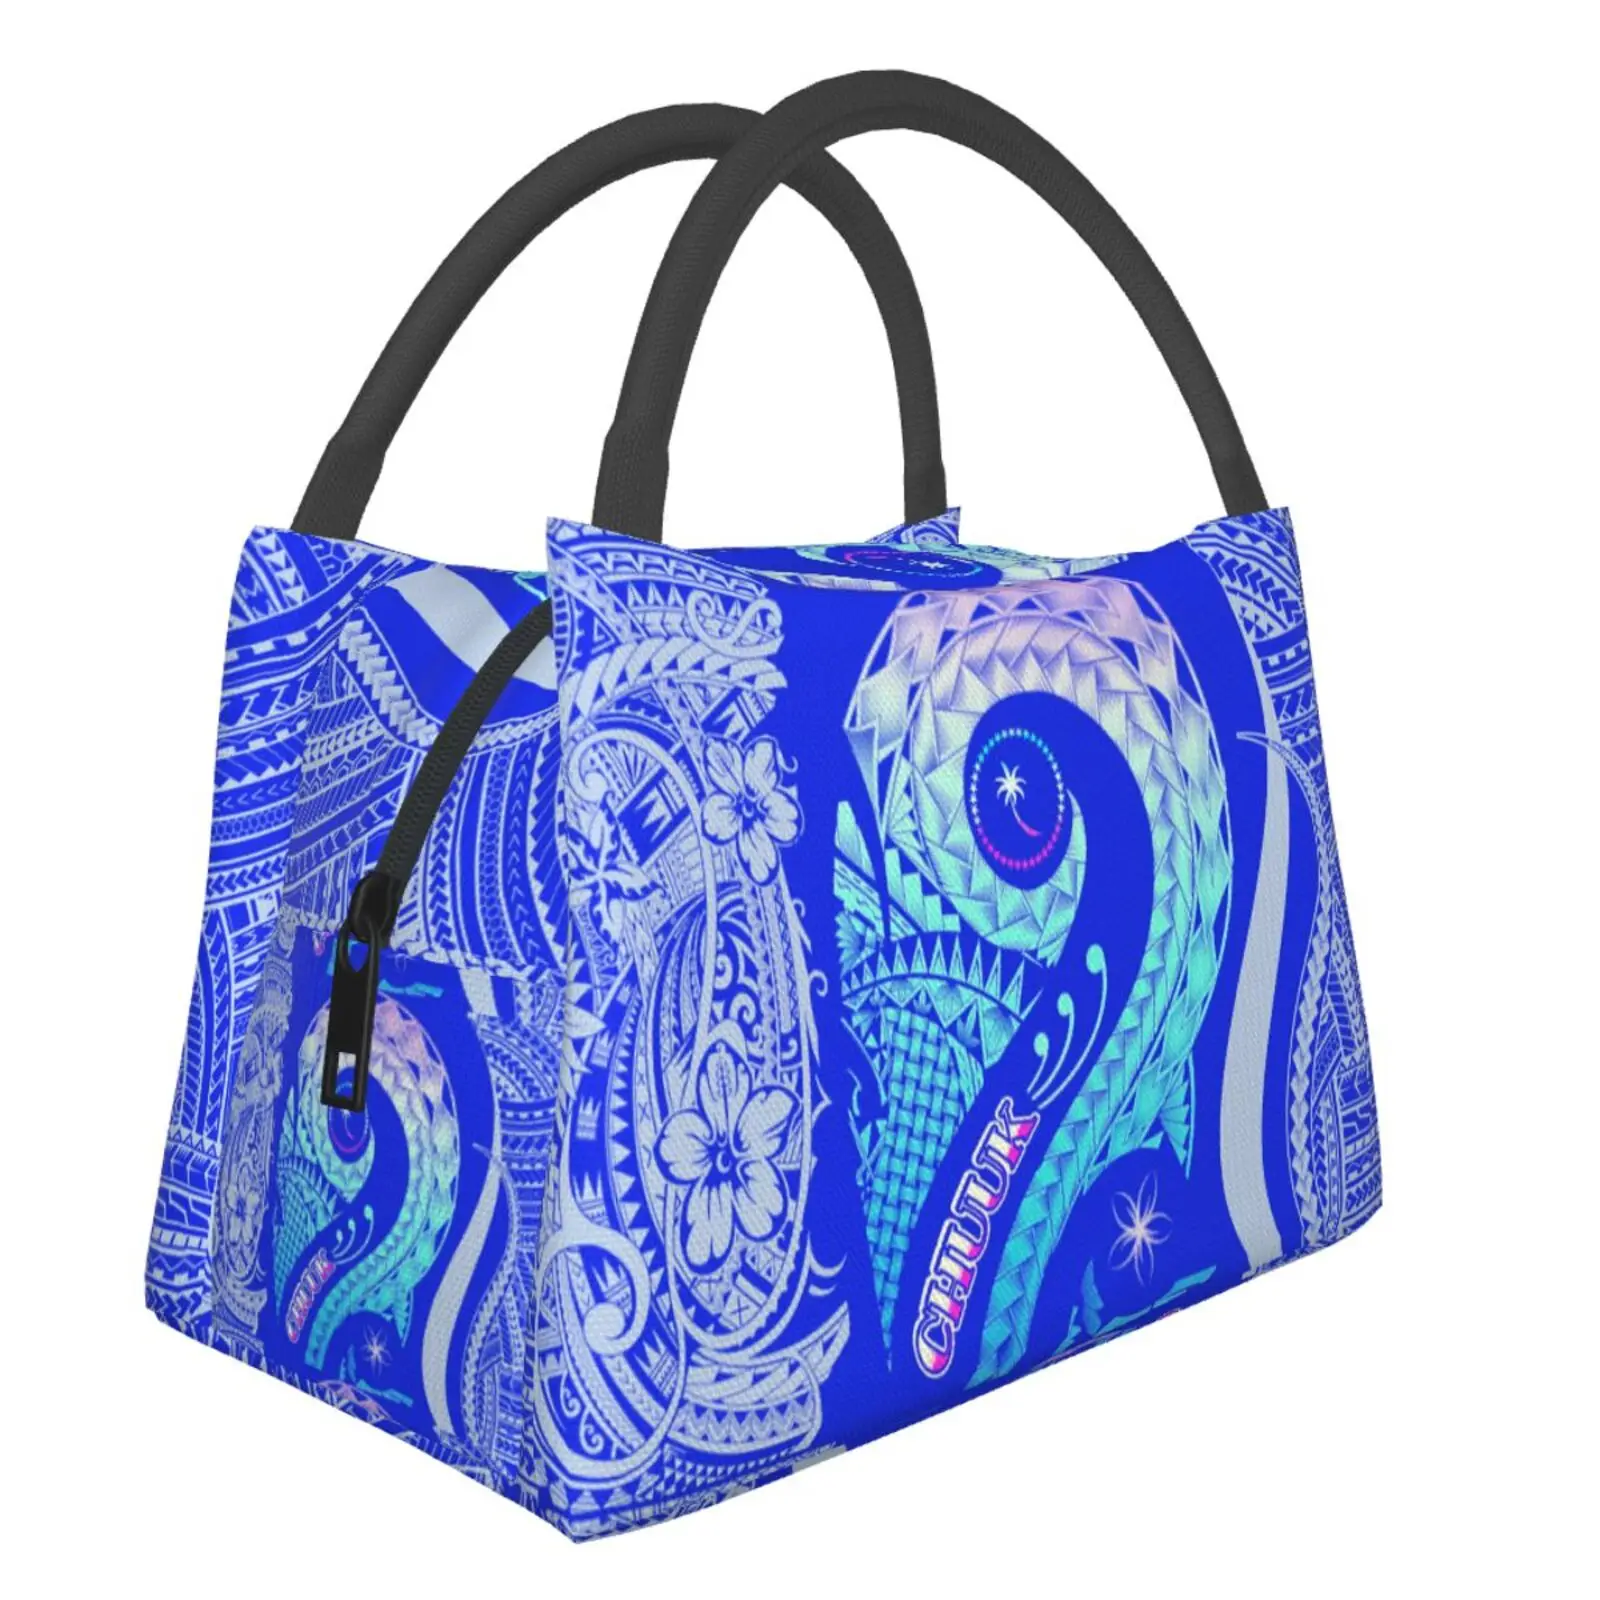 

NOISYDESIGNS Samoan Hibiscus Polynesian Tribal Waterproof Oxford Cloth Portable Thermal Lunch Bags For Women Lunch Food Bags